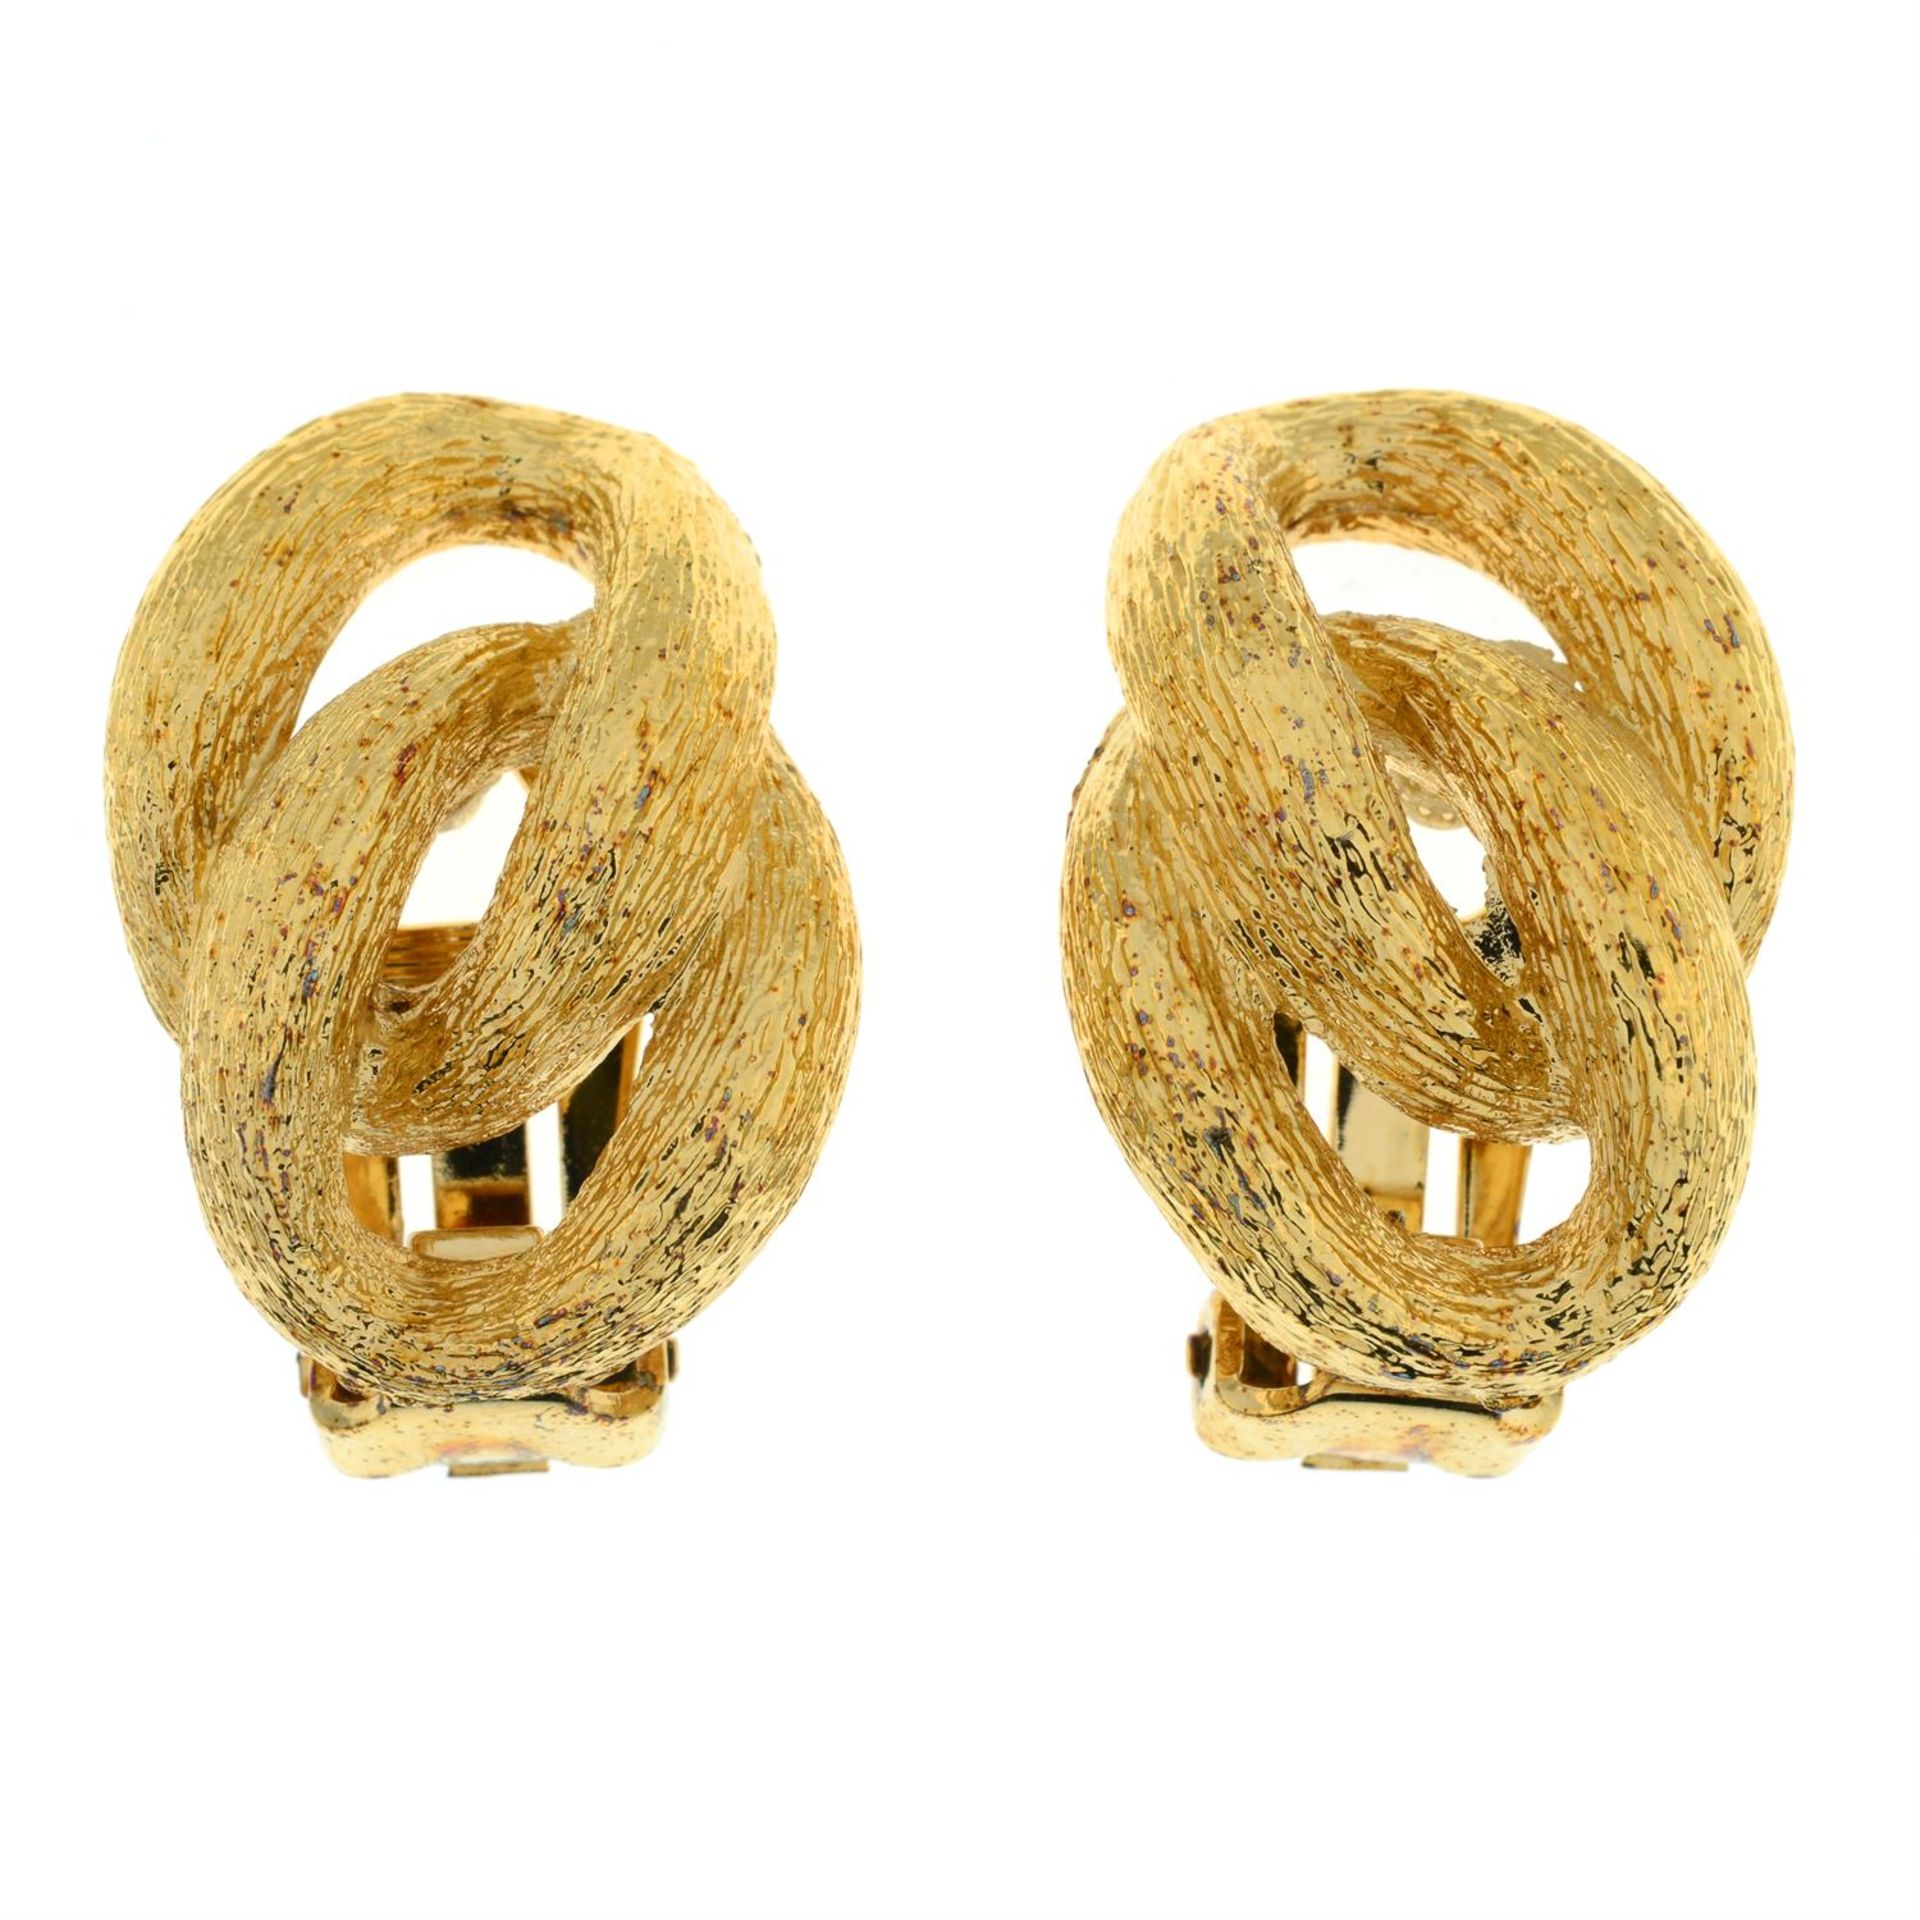 CHRISTIAN DIOR - a pair of clip-on earrings.